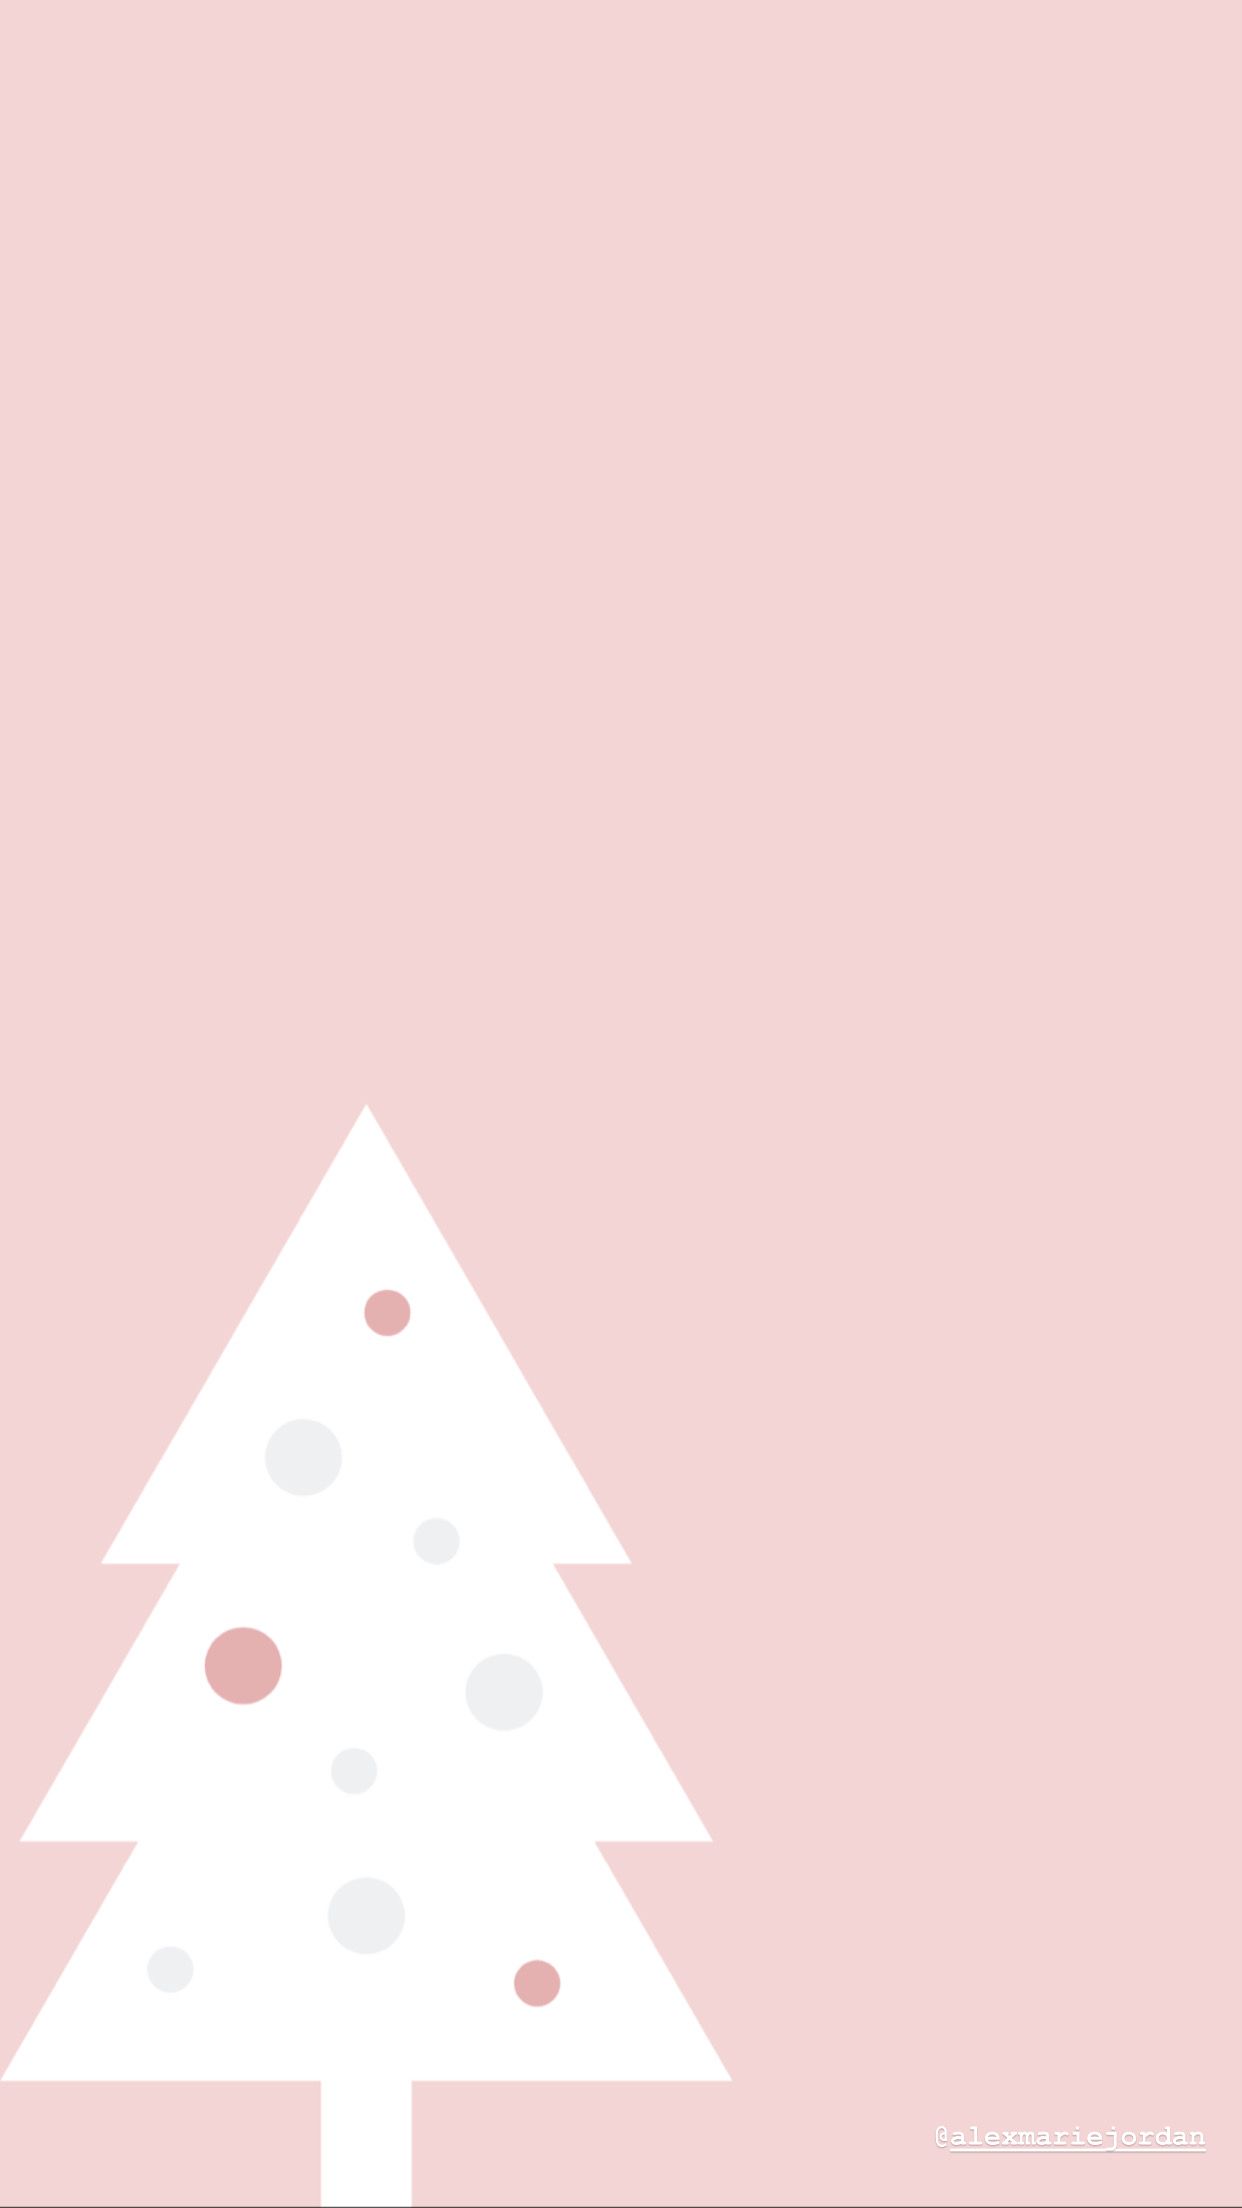 Christmas tree wallpaper for your phone! Pink and white. - Cute Christmas